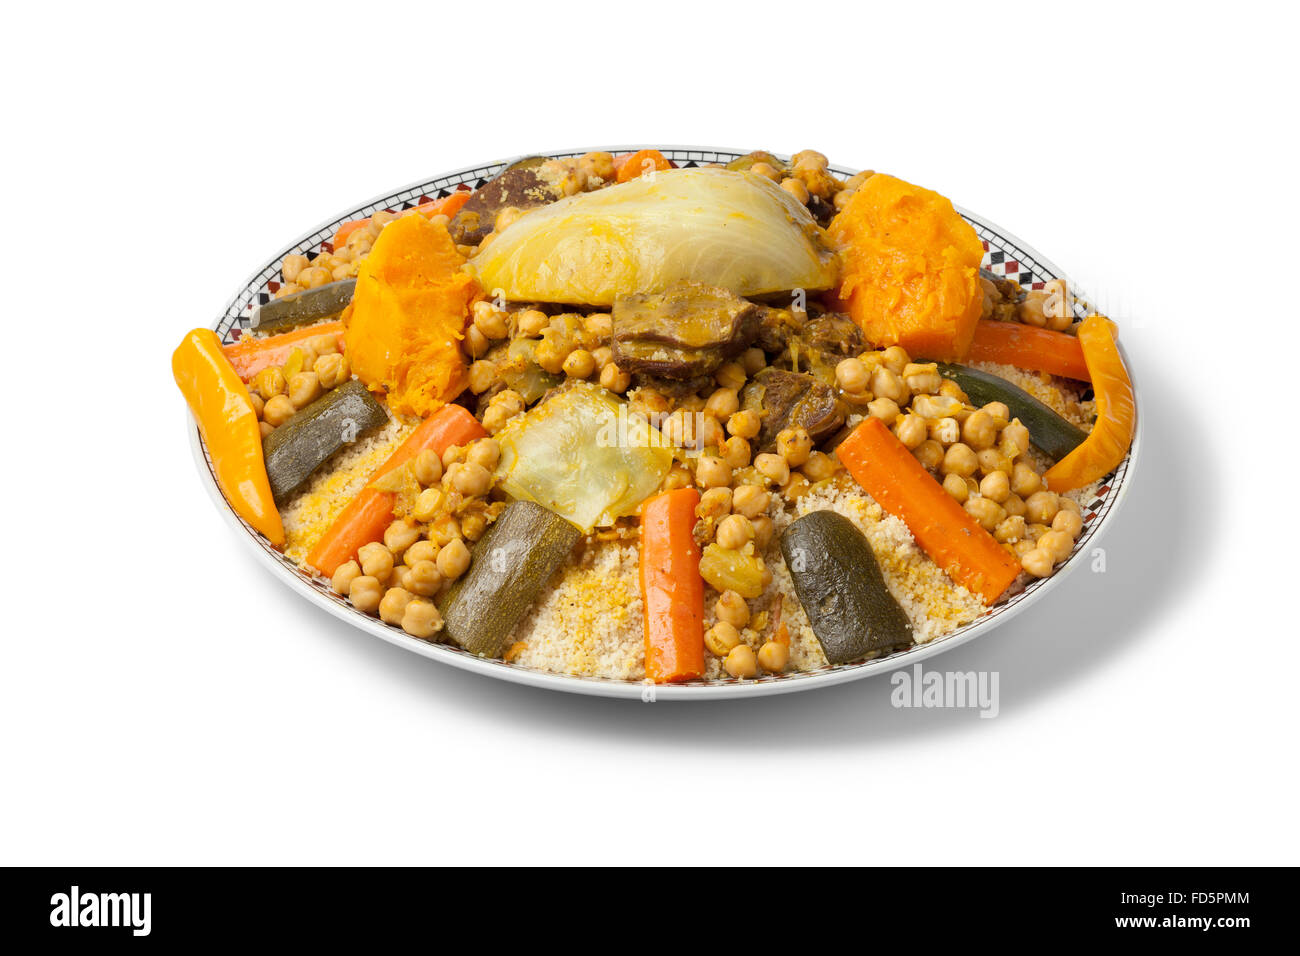 Trditional Moroccan couscous dish on white background Stock Photo